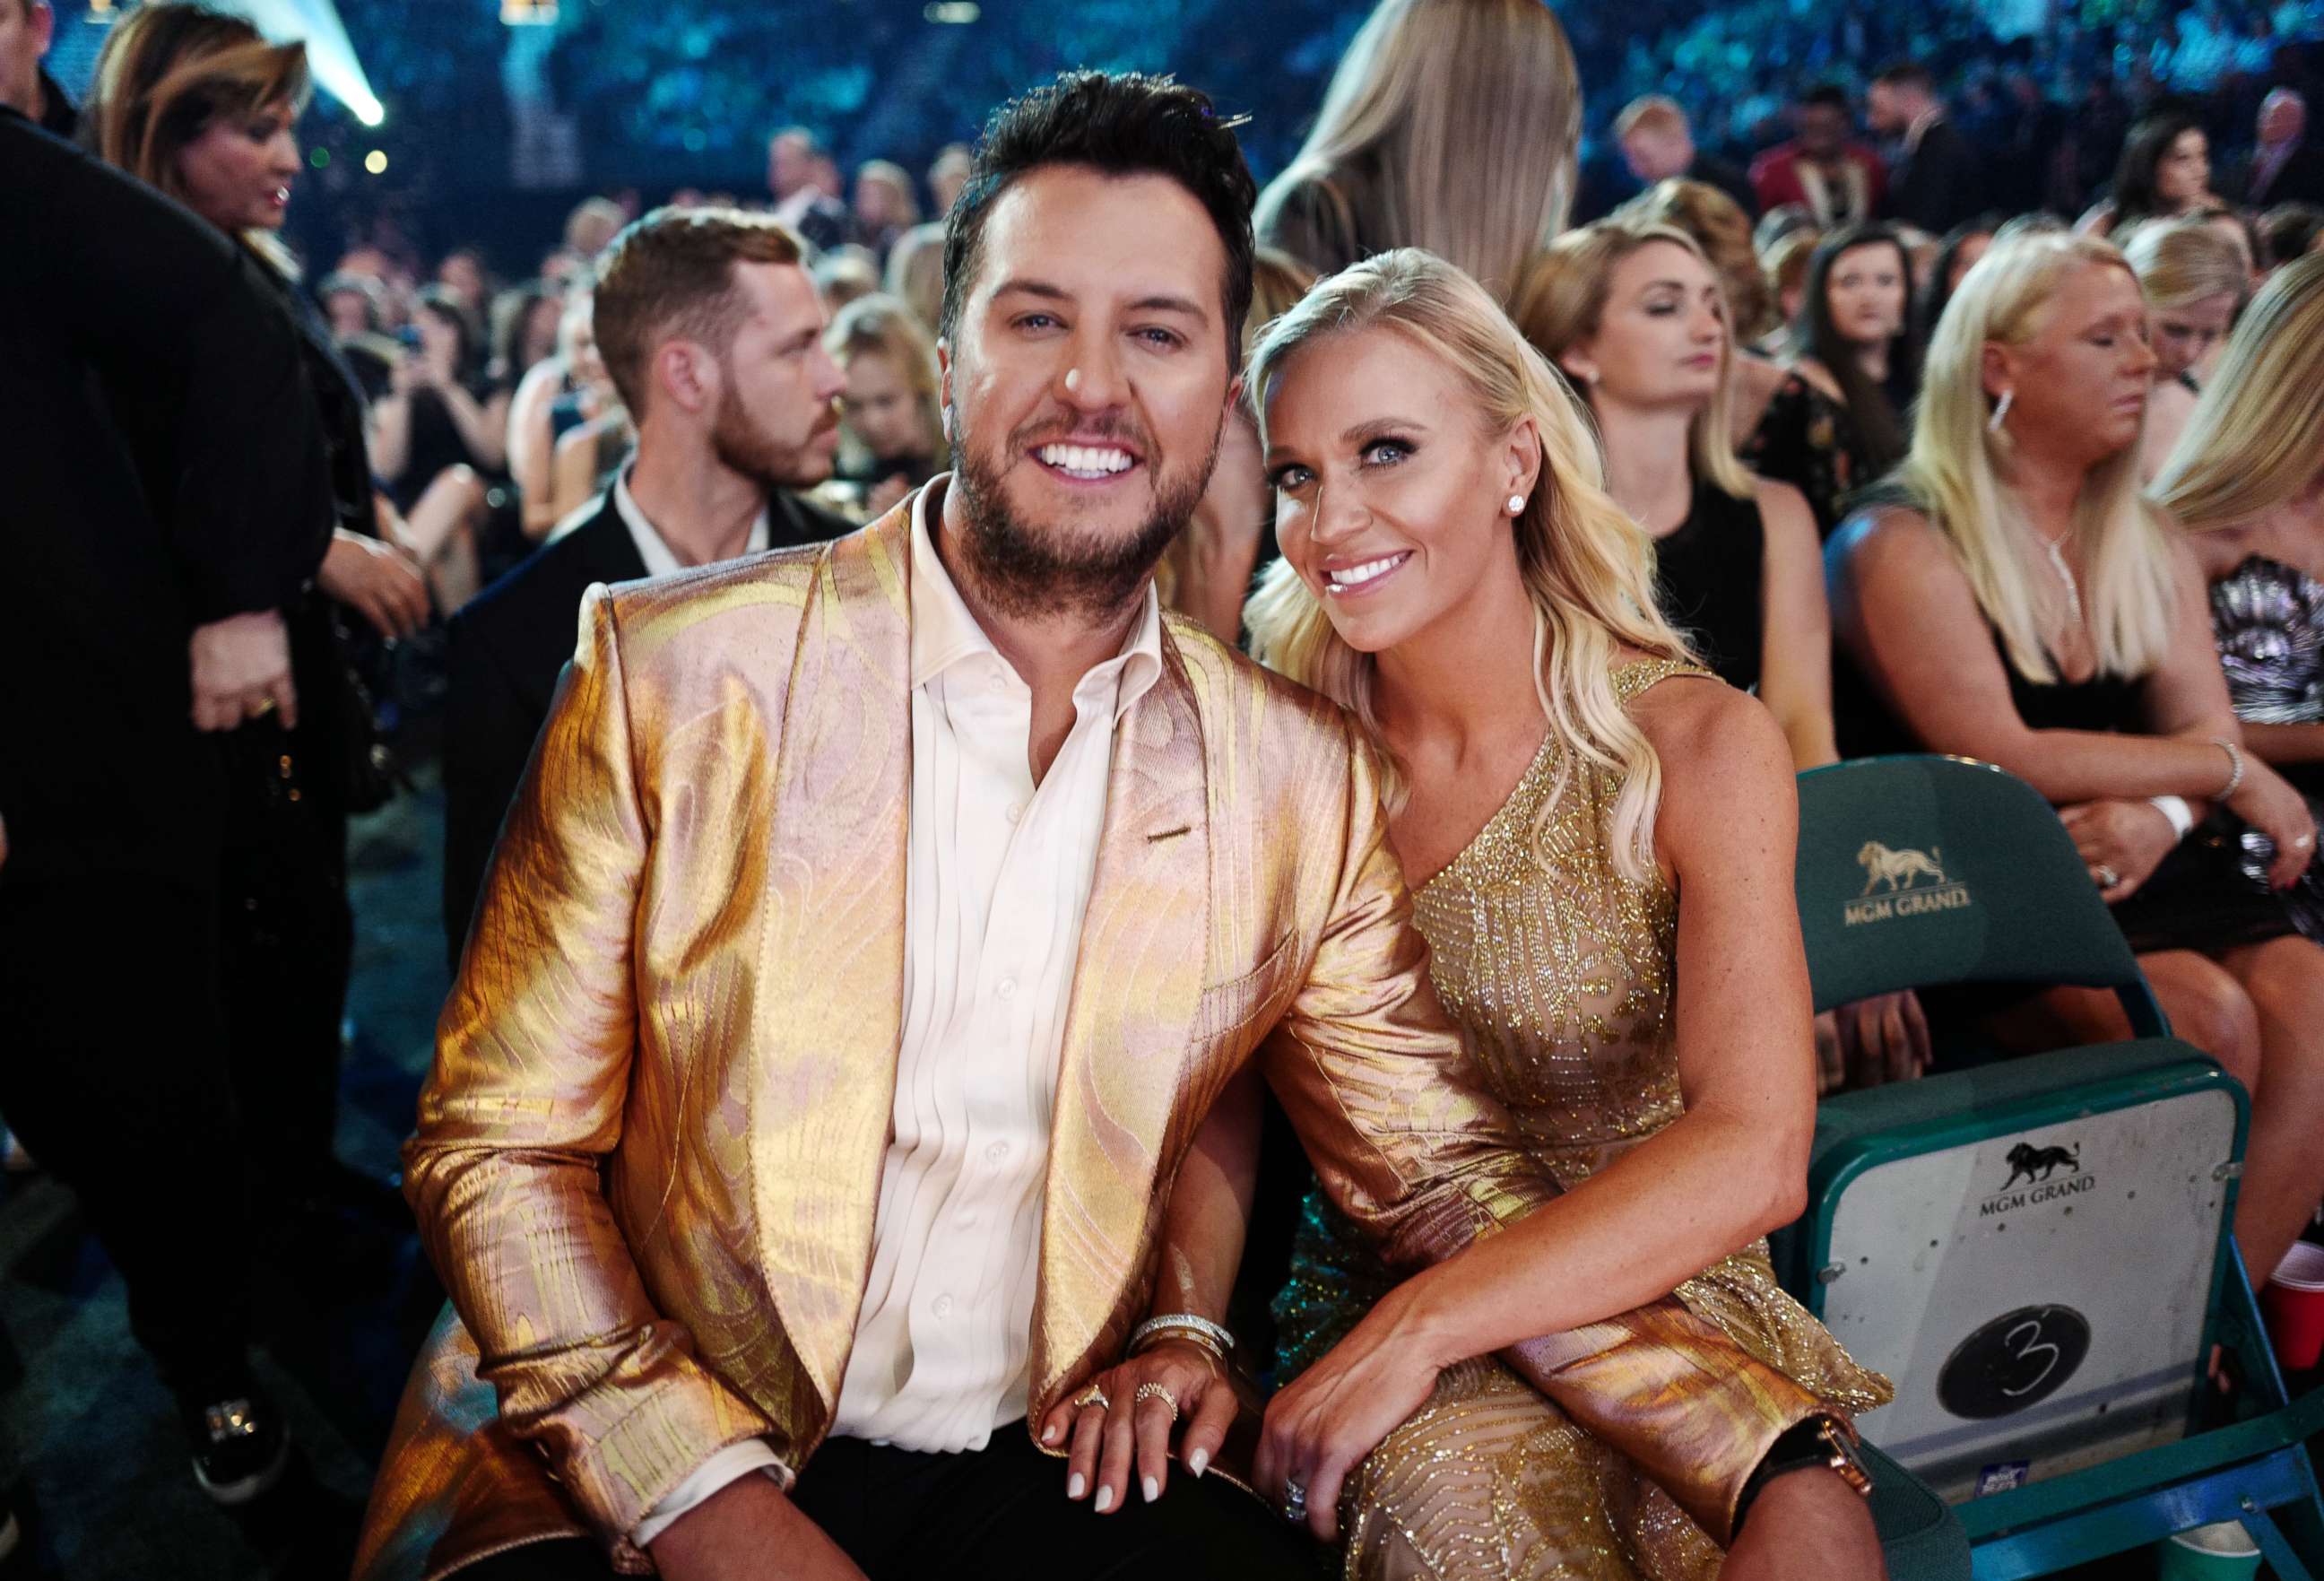 PHOTO: Luke Bryan and Caroline Boyer attend the 54th Academy Of Country Music Awards at MGM Grand Garden Arena on April 07, 2019, in Las Vegas.